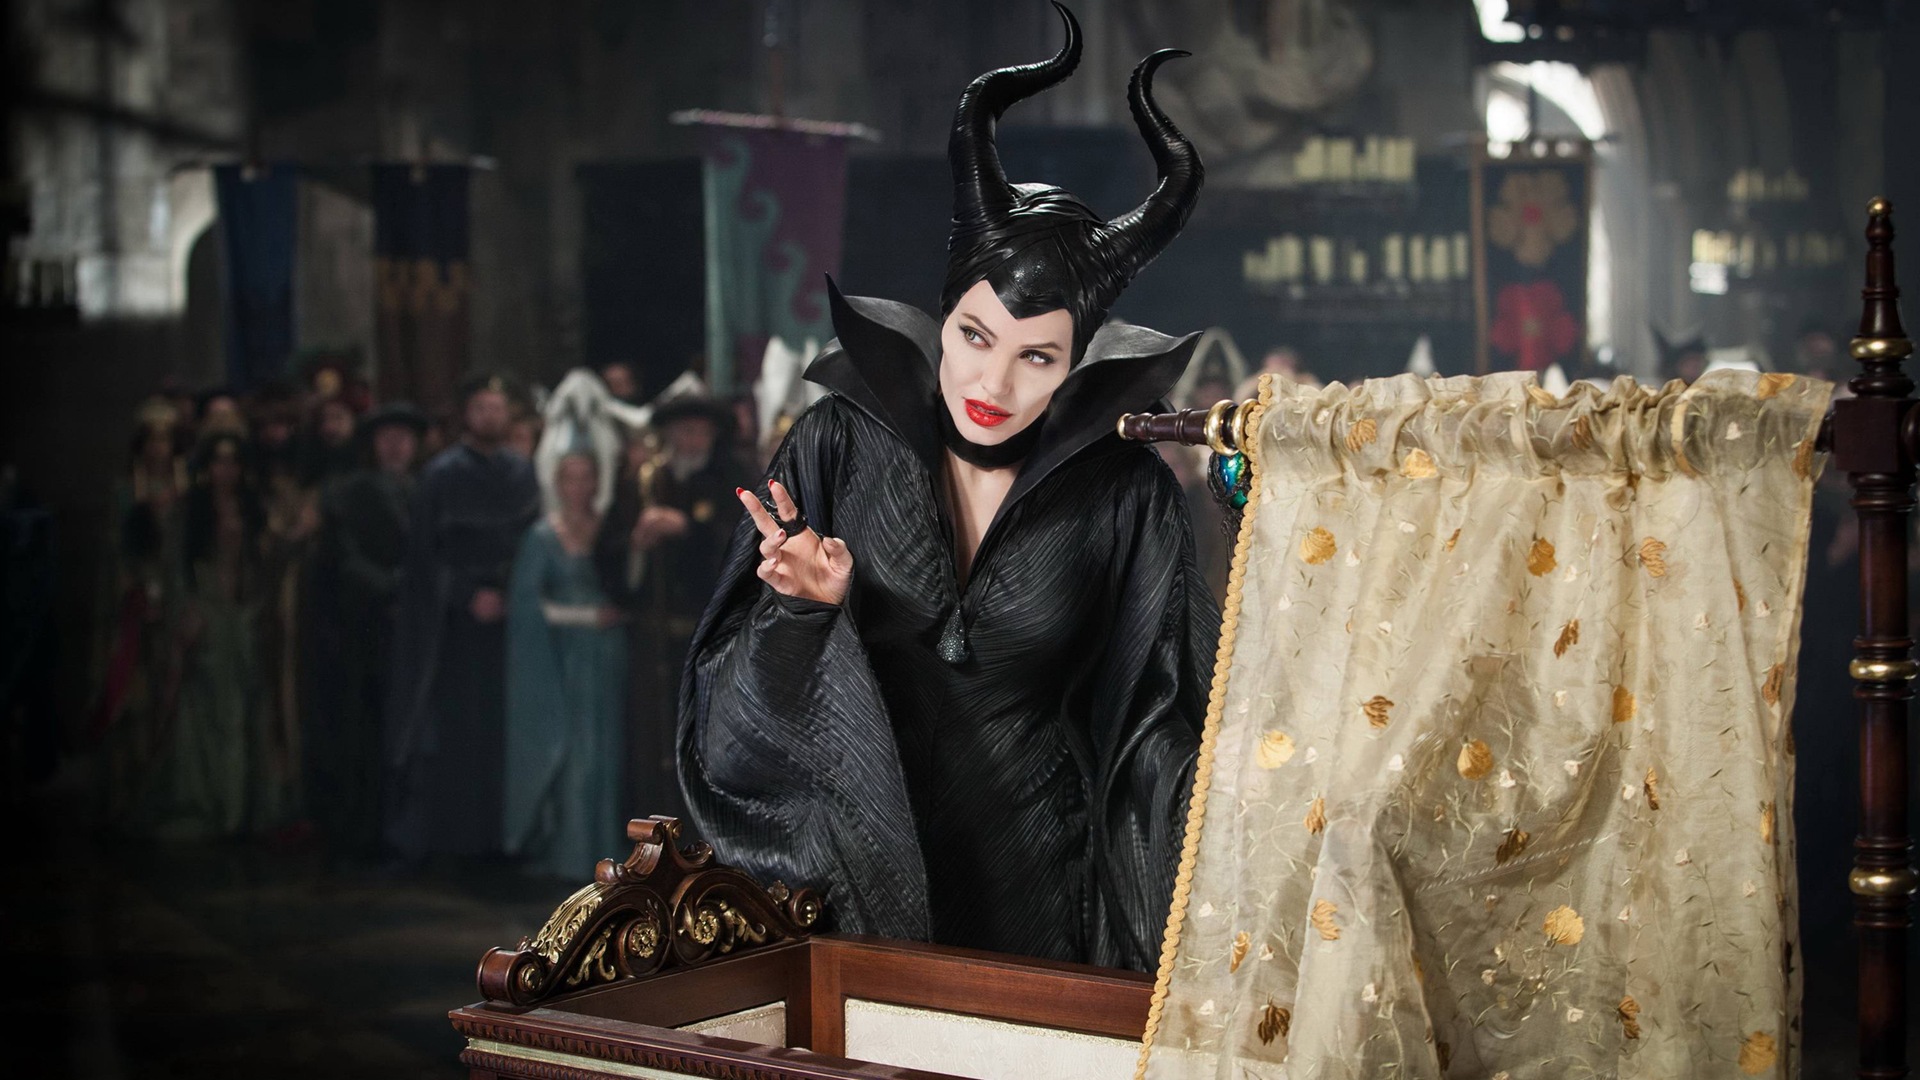 Maleficent 2014 HD movie wallpapers #5 - 1920x1080